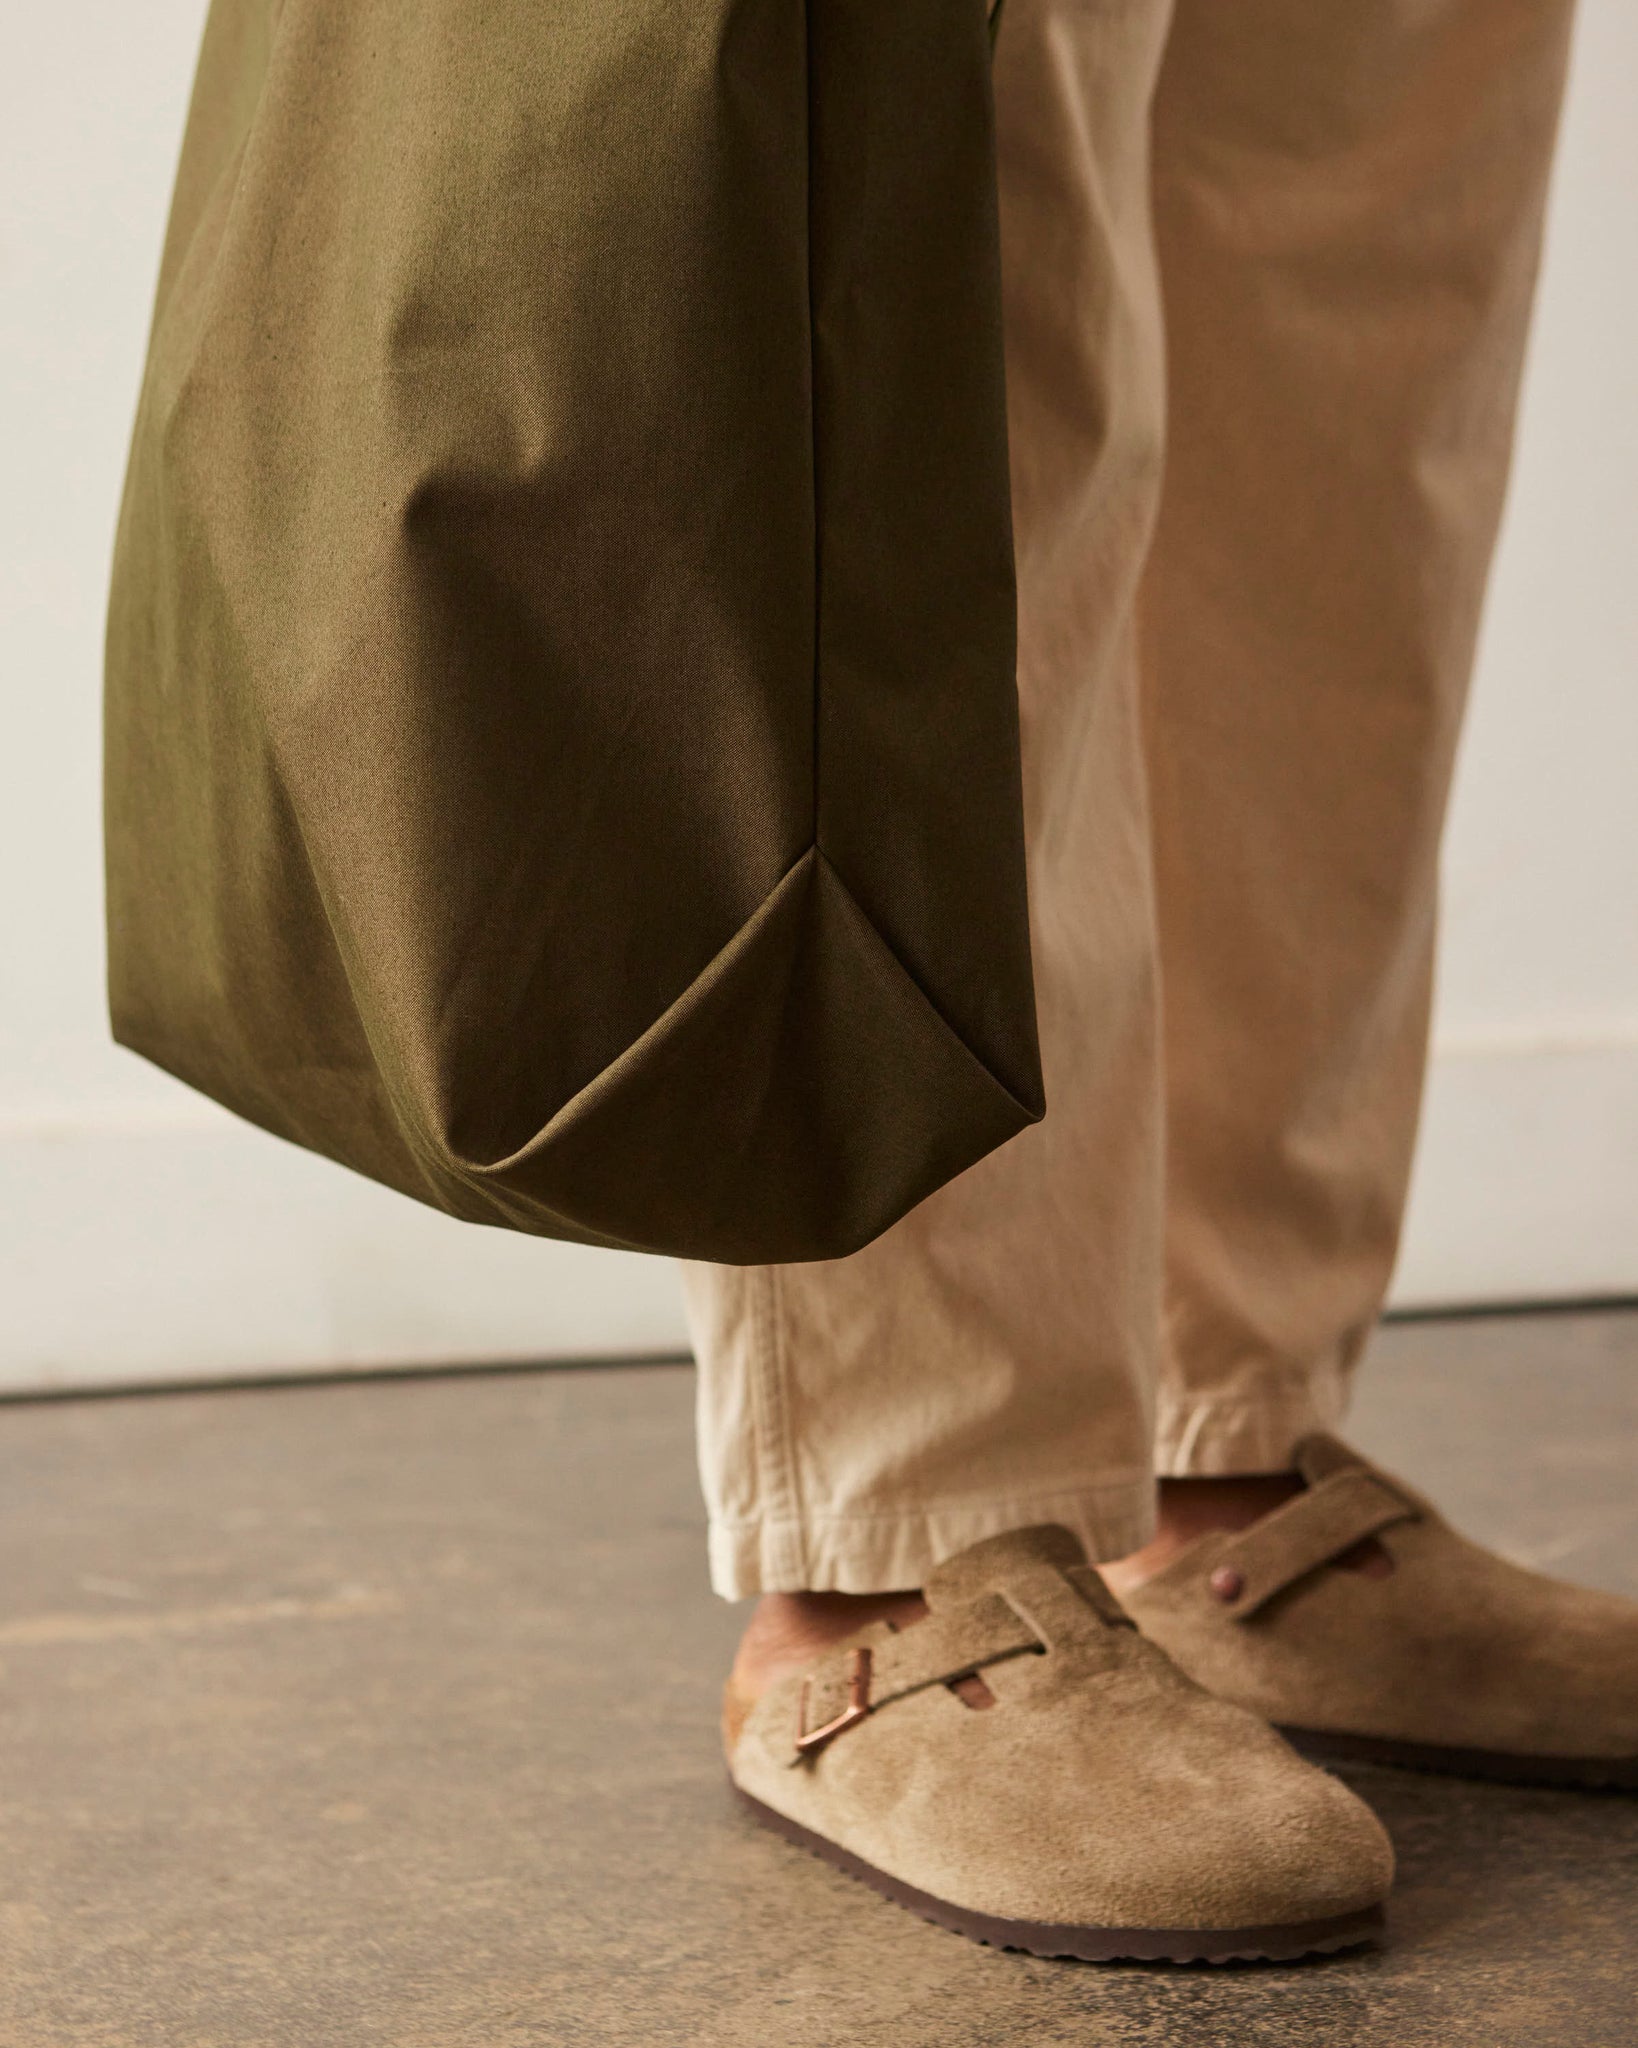 Engineered Garments Weather Poplin Carry All Tote, Olive